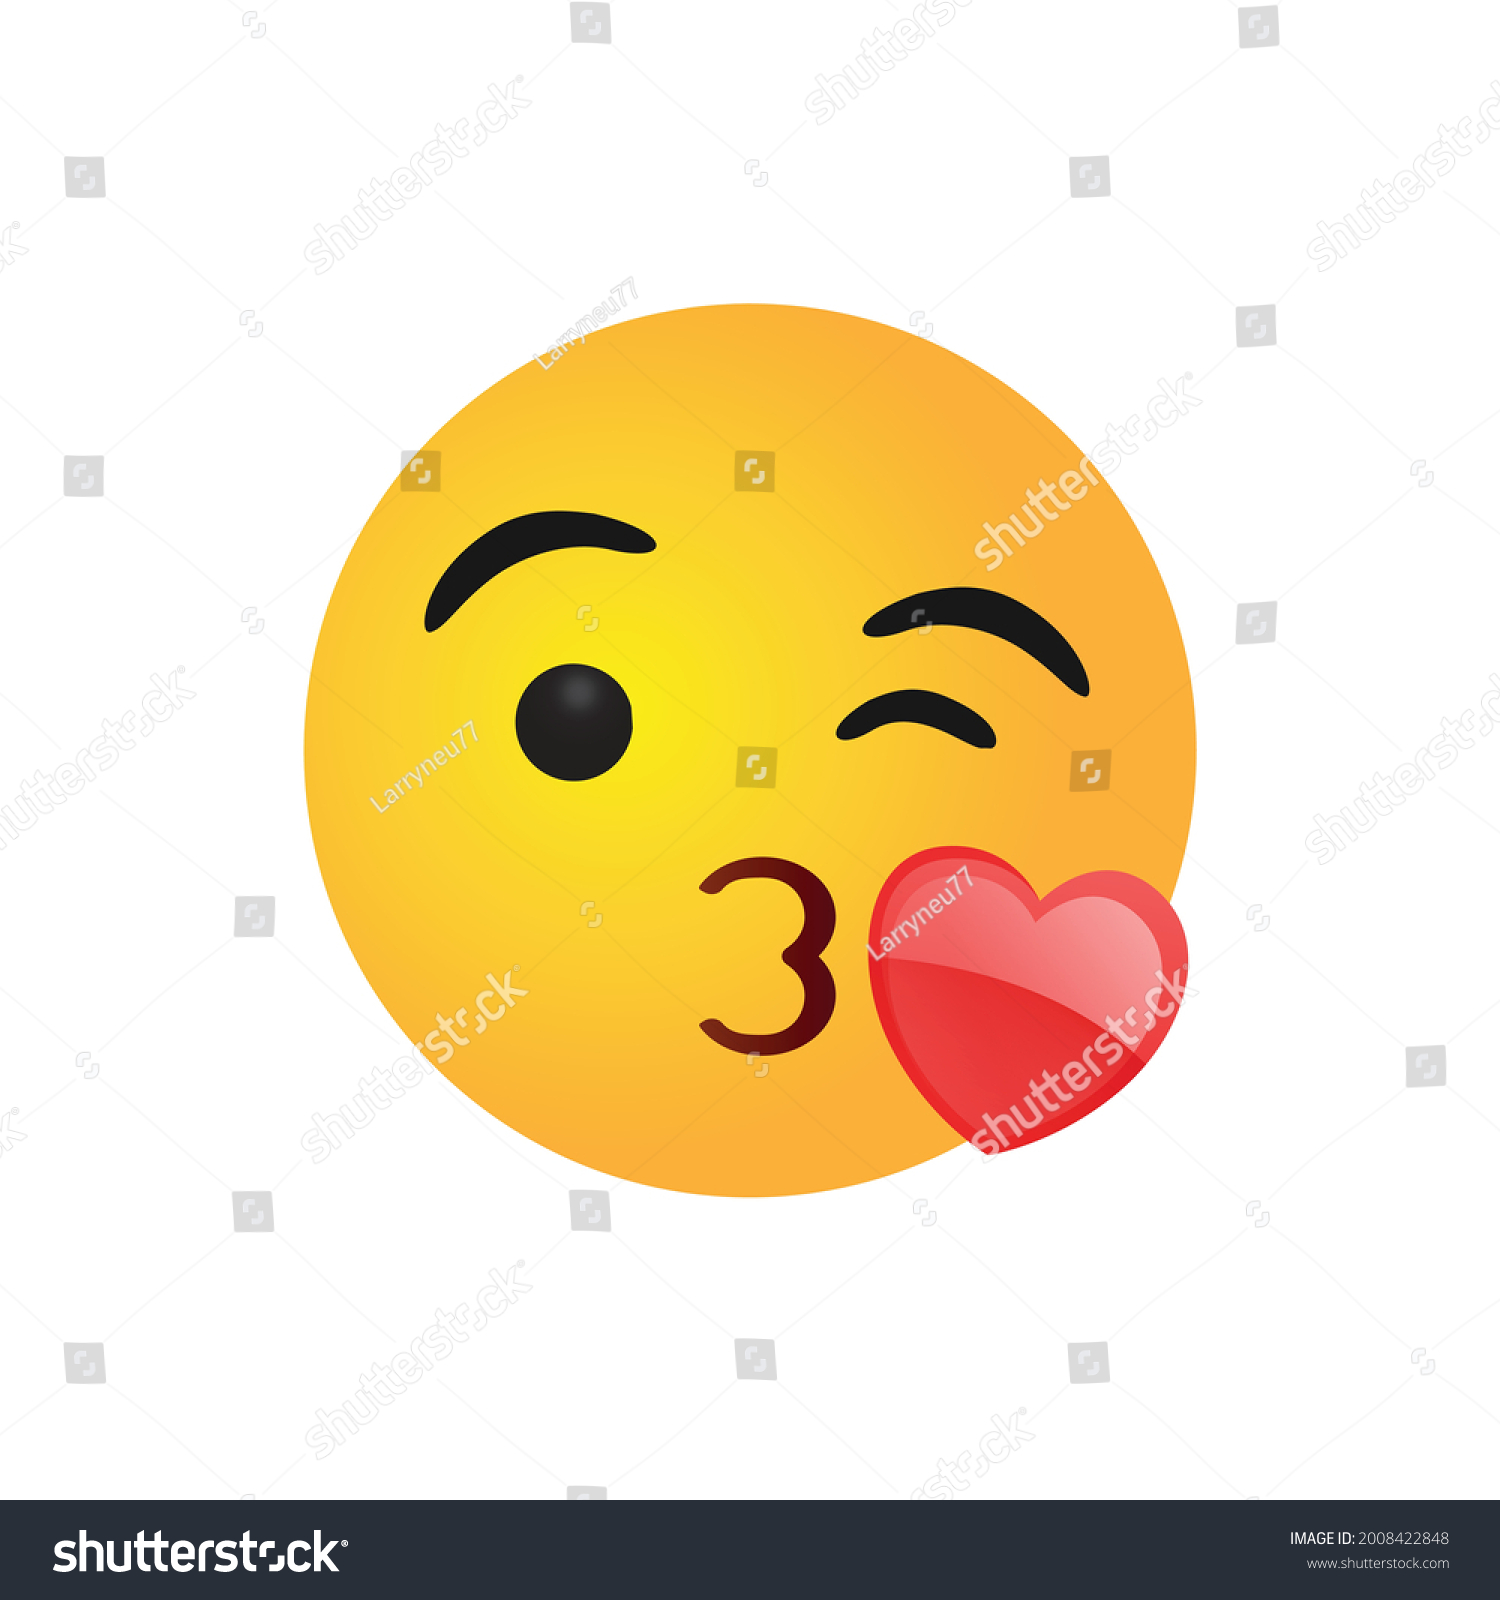 SVG of vector round yellow cartoon bubble Blow Blowing Kissing Kiss emoticons comment social media Facebook Instagram Whatsapp chat comment reactions, icon template face emoji character message svg